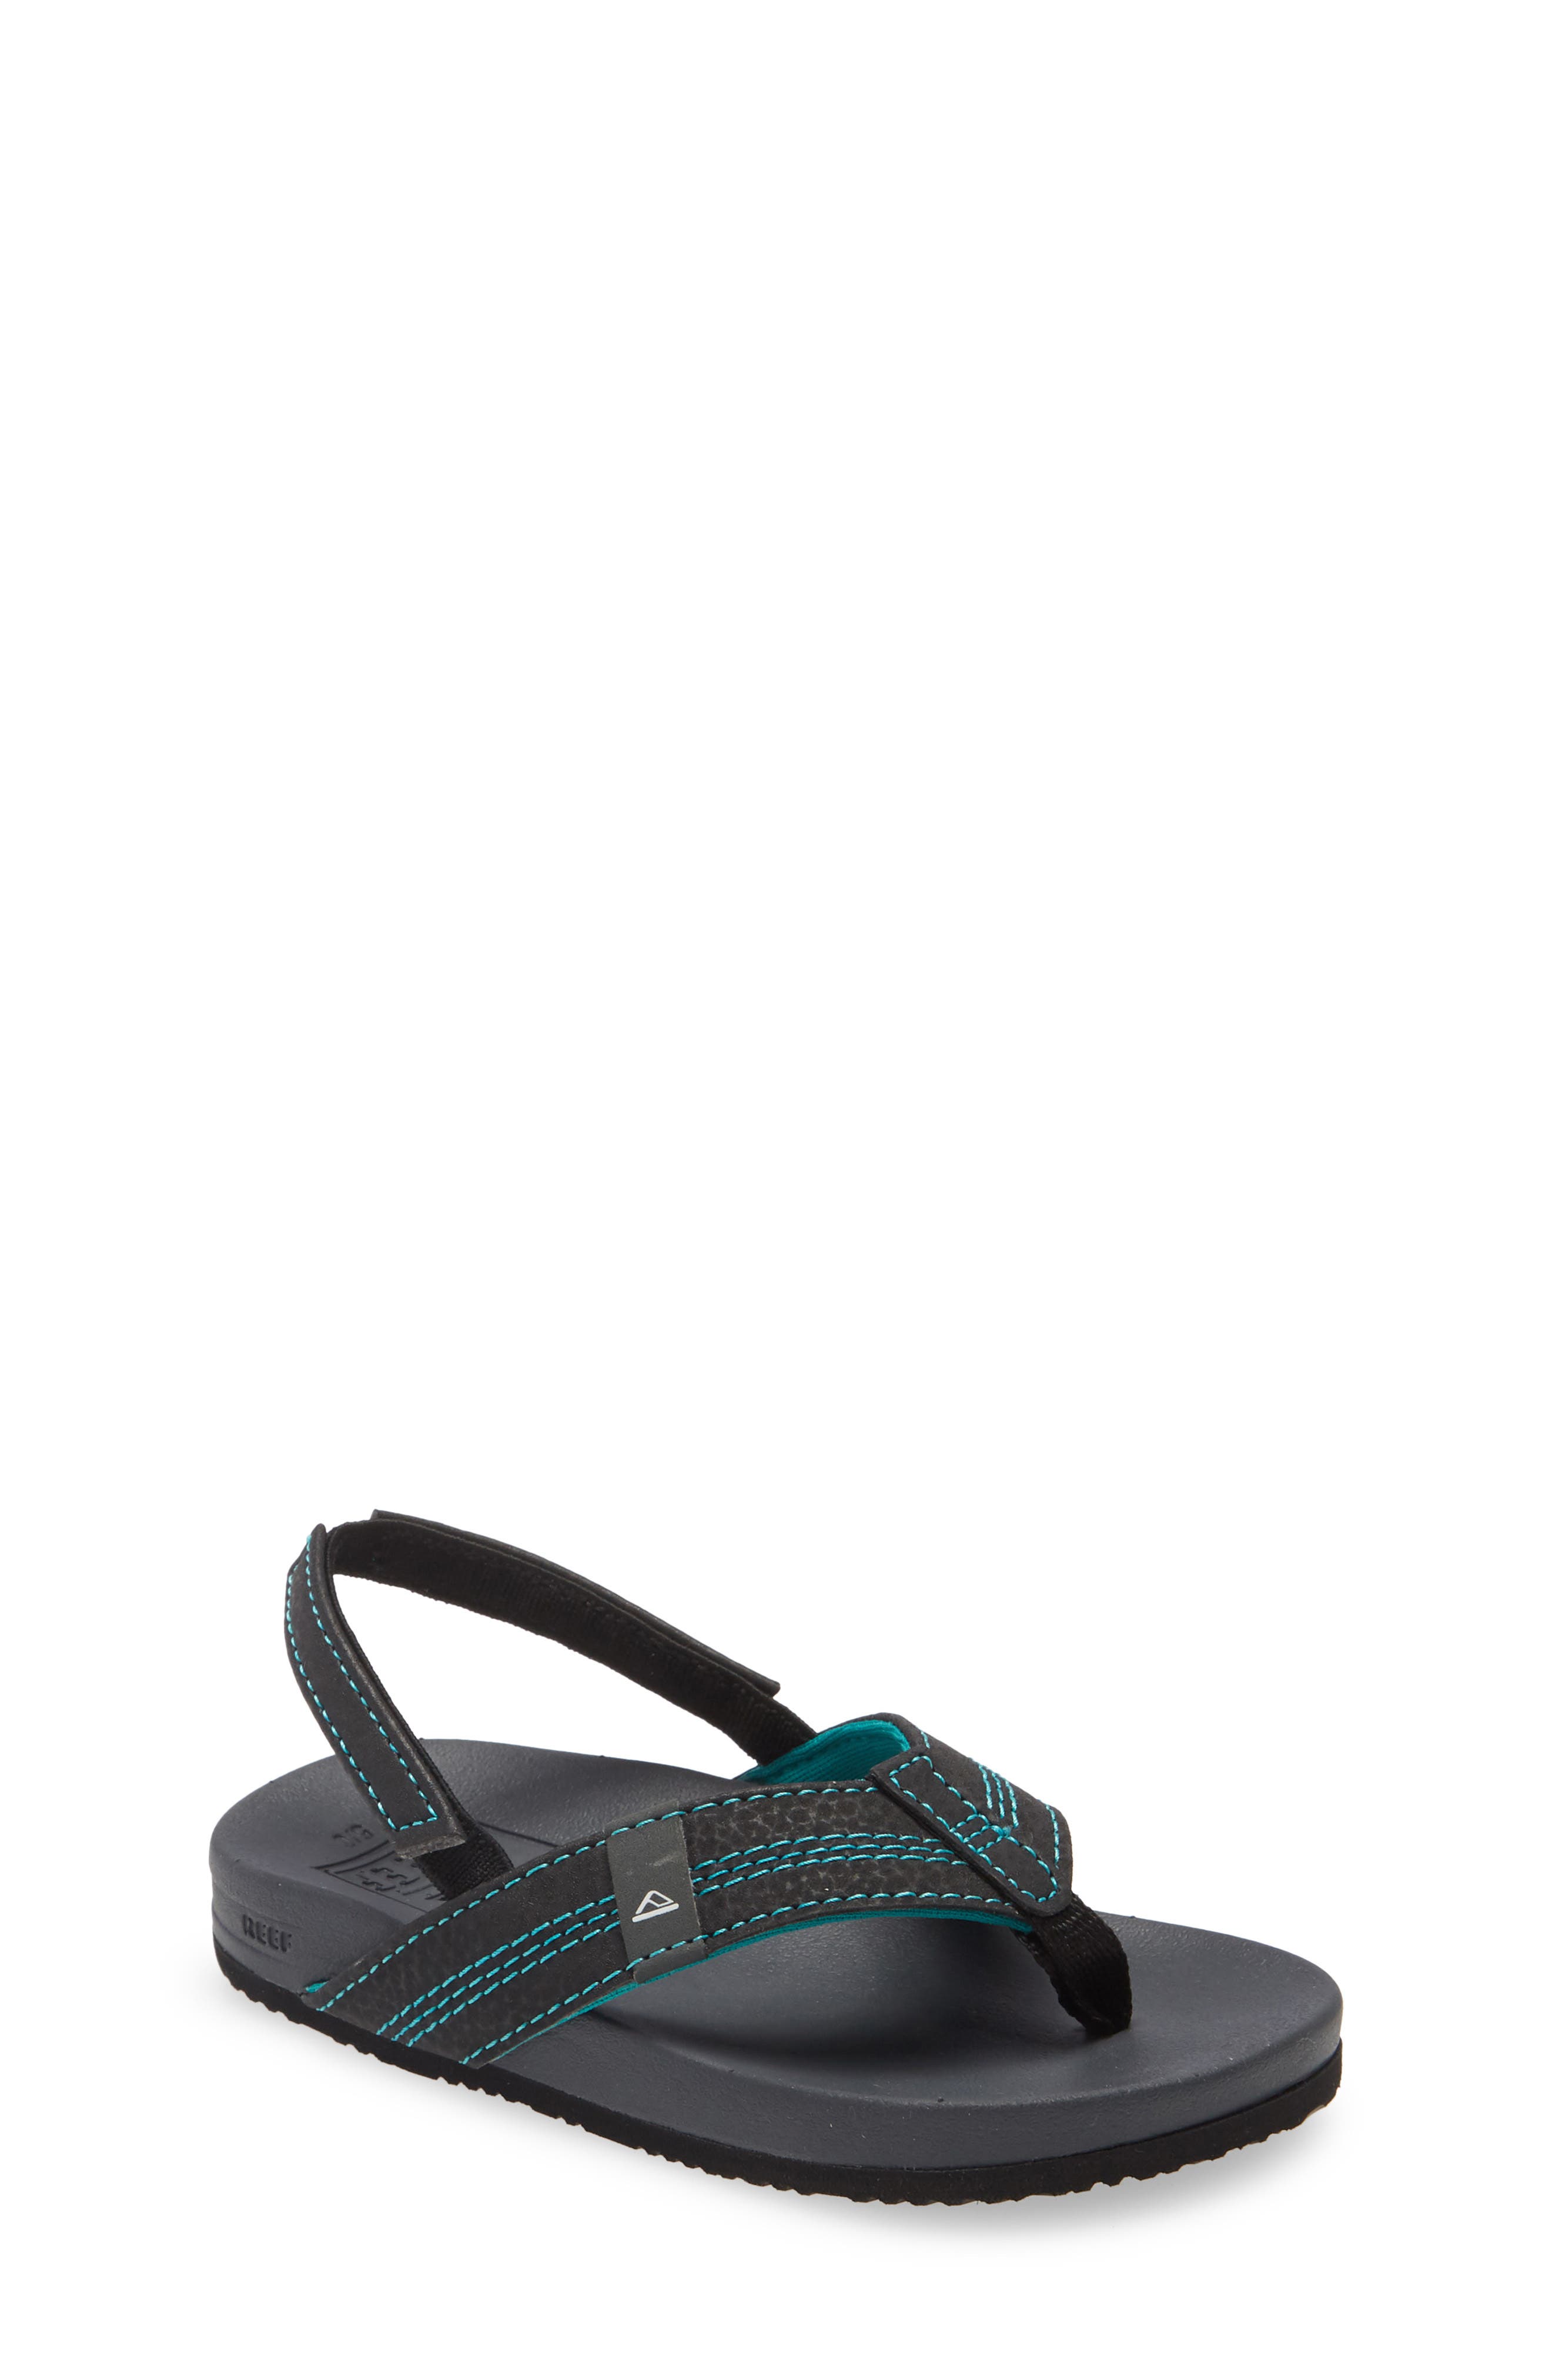 h and m boys sandals